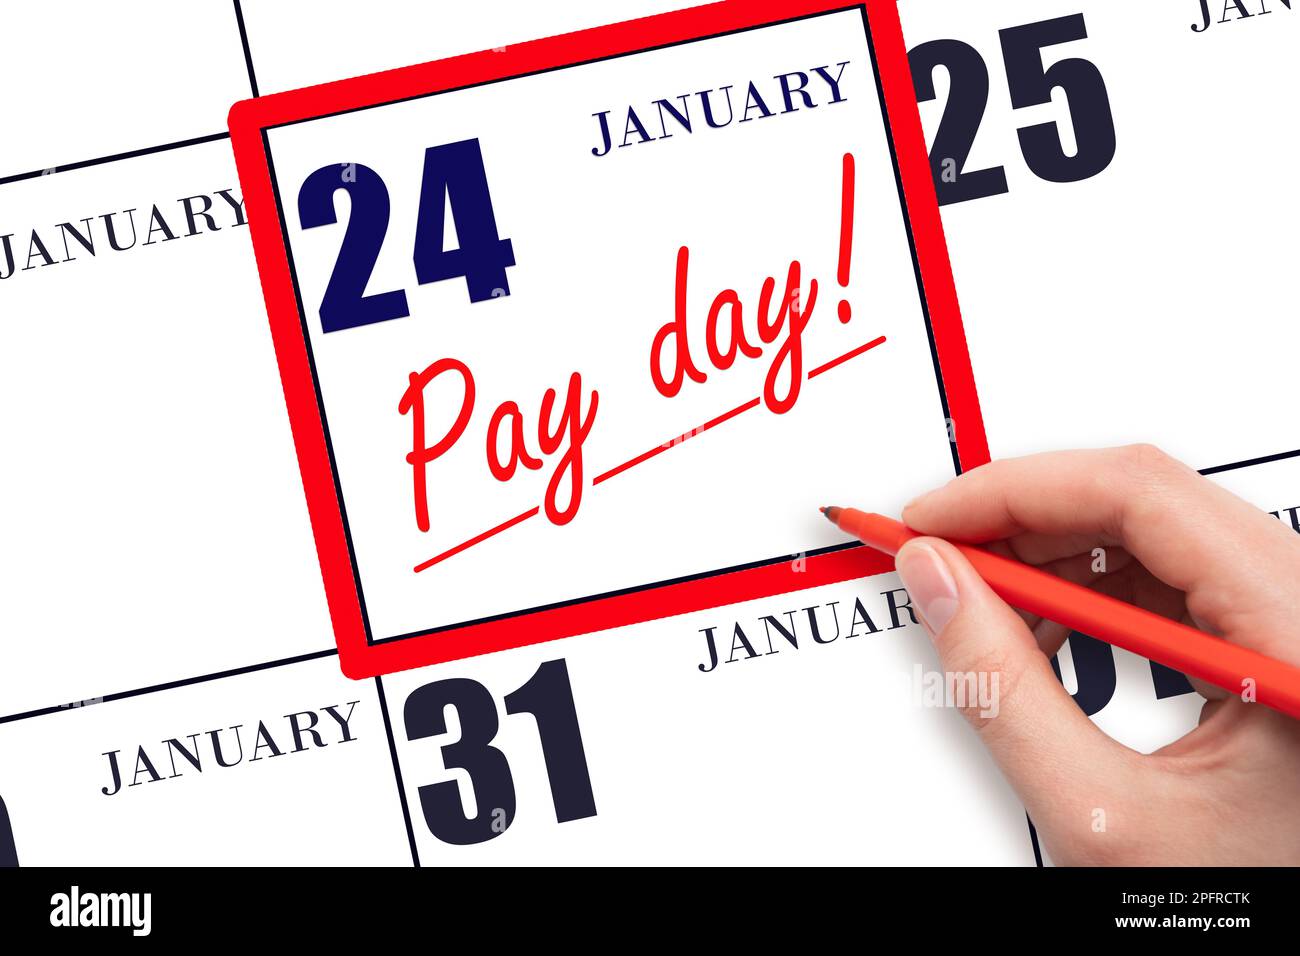 24th day of January. Hand writing text PAY DATE on calendar date January 24 and underline it. Payment due date.  Reminder concept of payment. Winter m Stock Photo